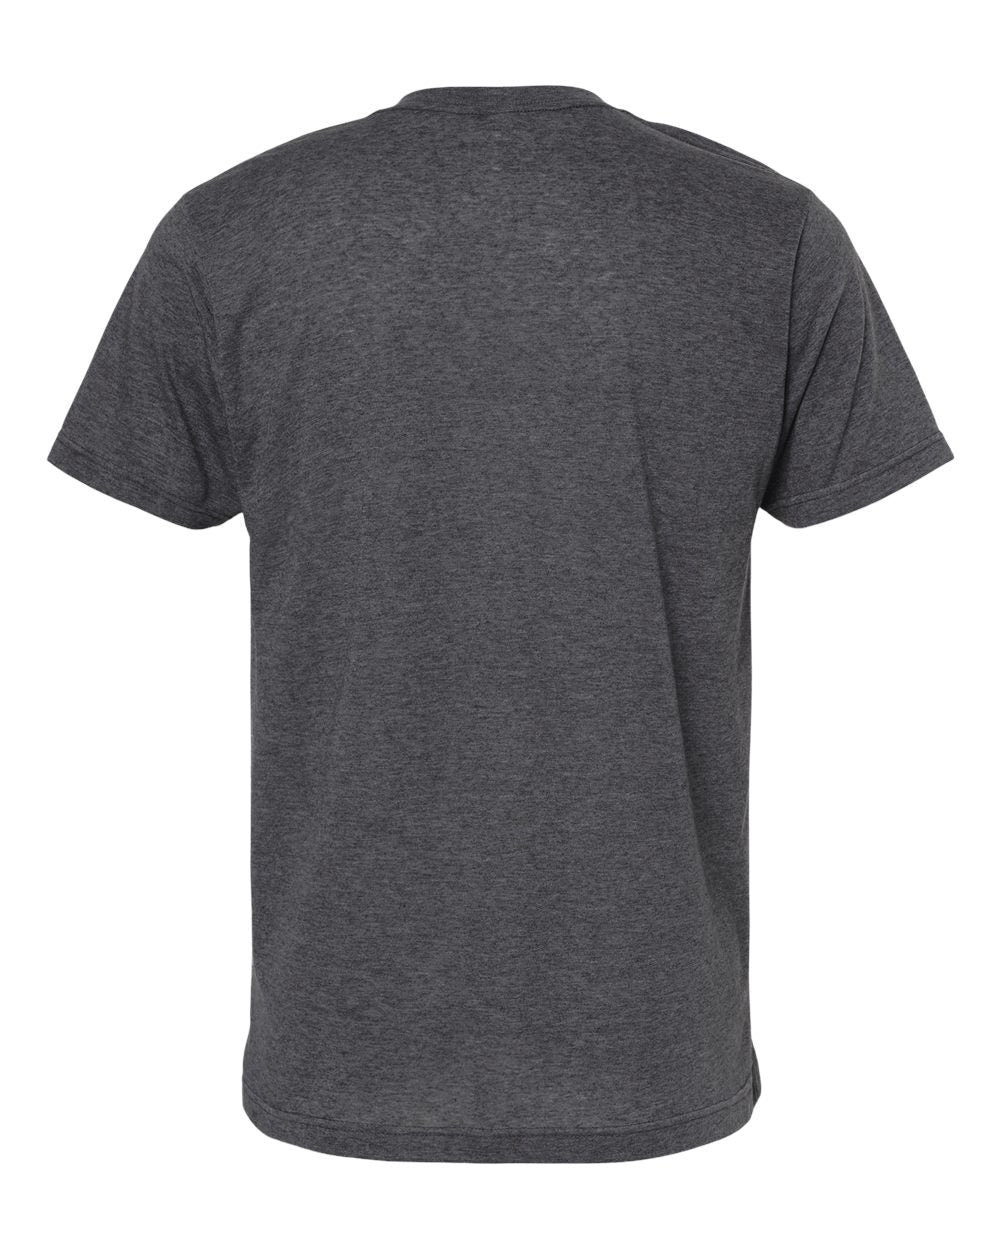 M&O Deluxe Blend V-Neck T-Shirt 3543 #color_Heather Charcoal